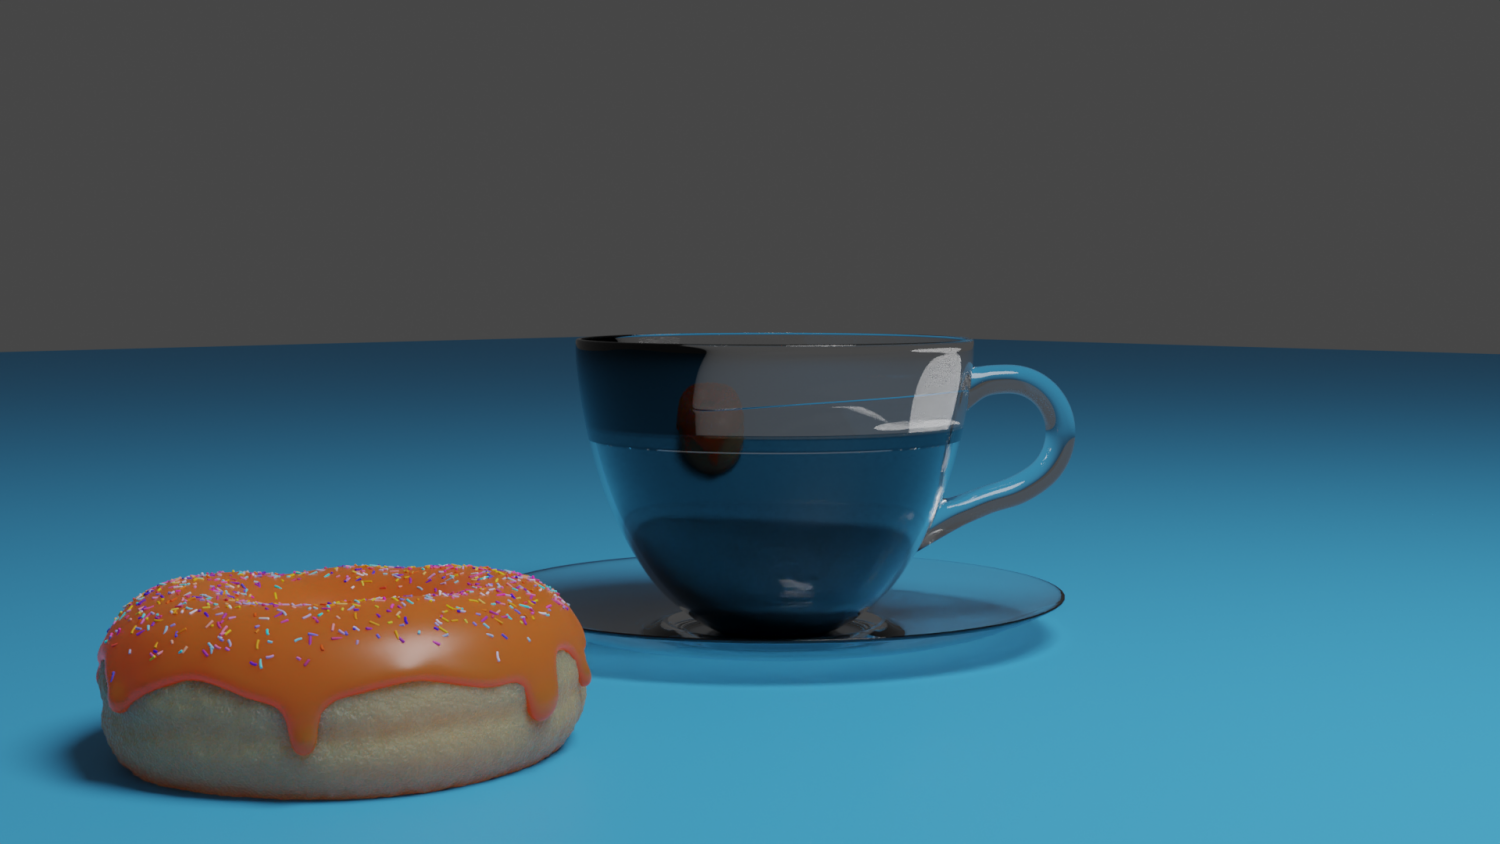 Animation+II+students+are+delving+into+3D+animation+by+creating+a+3D+donut+and+coffee+cup+in+the+animation+software%2C+Blender.+For+this+assignment%2C+they+will+follow+tutorials+to+guide+them+through+the+process.+%E2%80%9CI+am+enjoying+following+a+specific+guide+on+how+to+use+Blender%2C%E2%80%9D+sophomore+Simon+Tolentino+said.+%E2%80%9CI+feel+like+I+am+learning+the+necessary+steps+to+3D+animation+and+I+am+truly+enjoying+it.%E2%80%9D+Photo+Credit%3A+Farhad+Yazdani